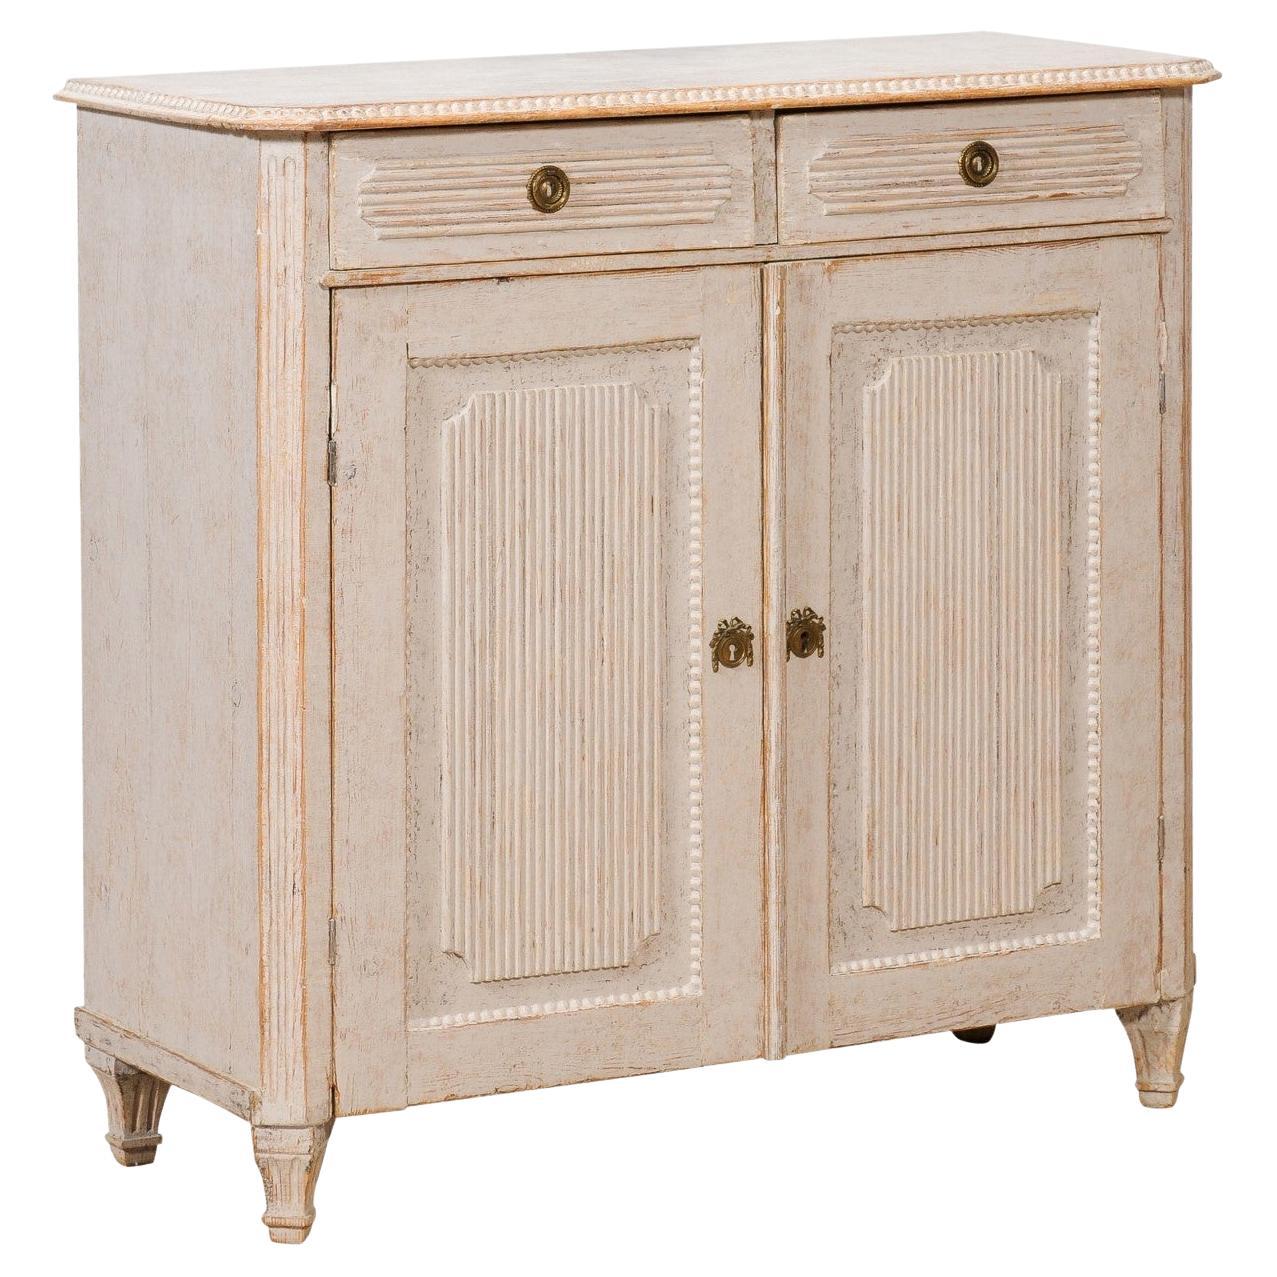 1820s Swedish Gustavian Period Buffet with Carved Reeded Accents